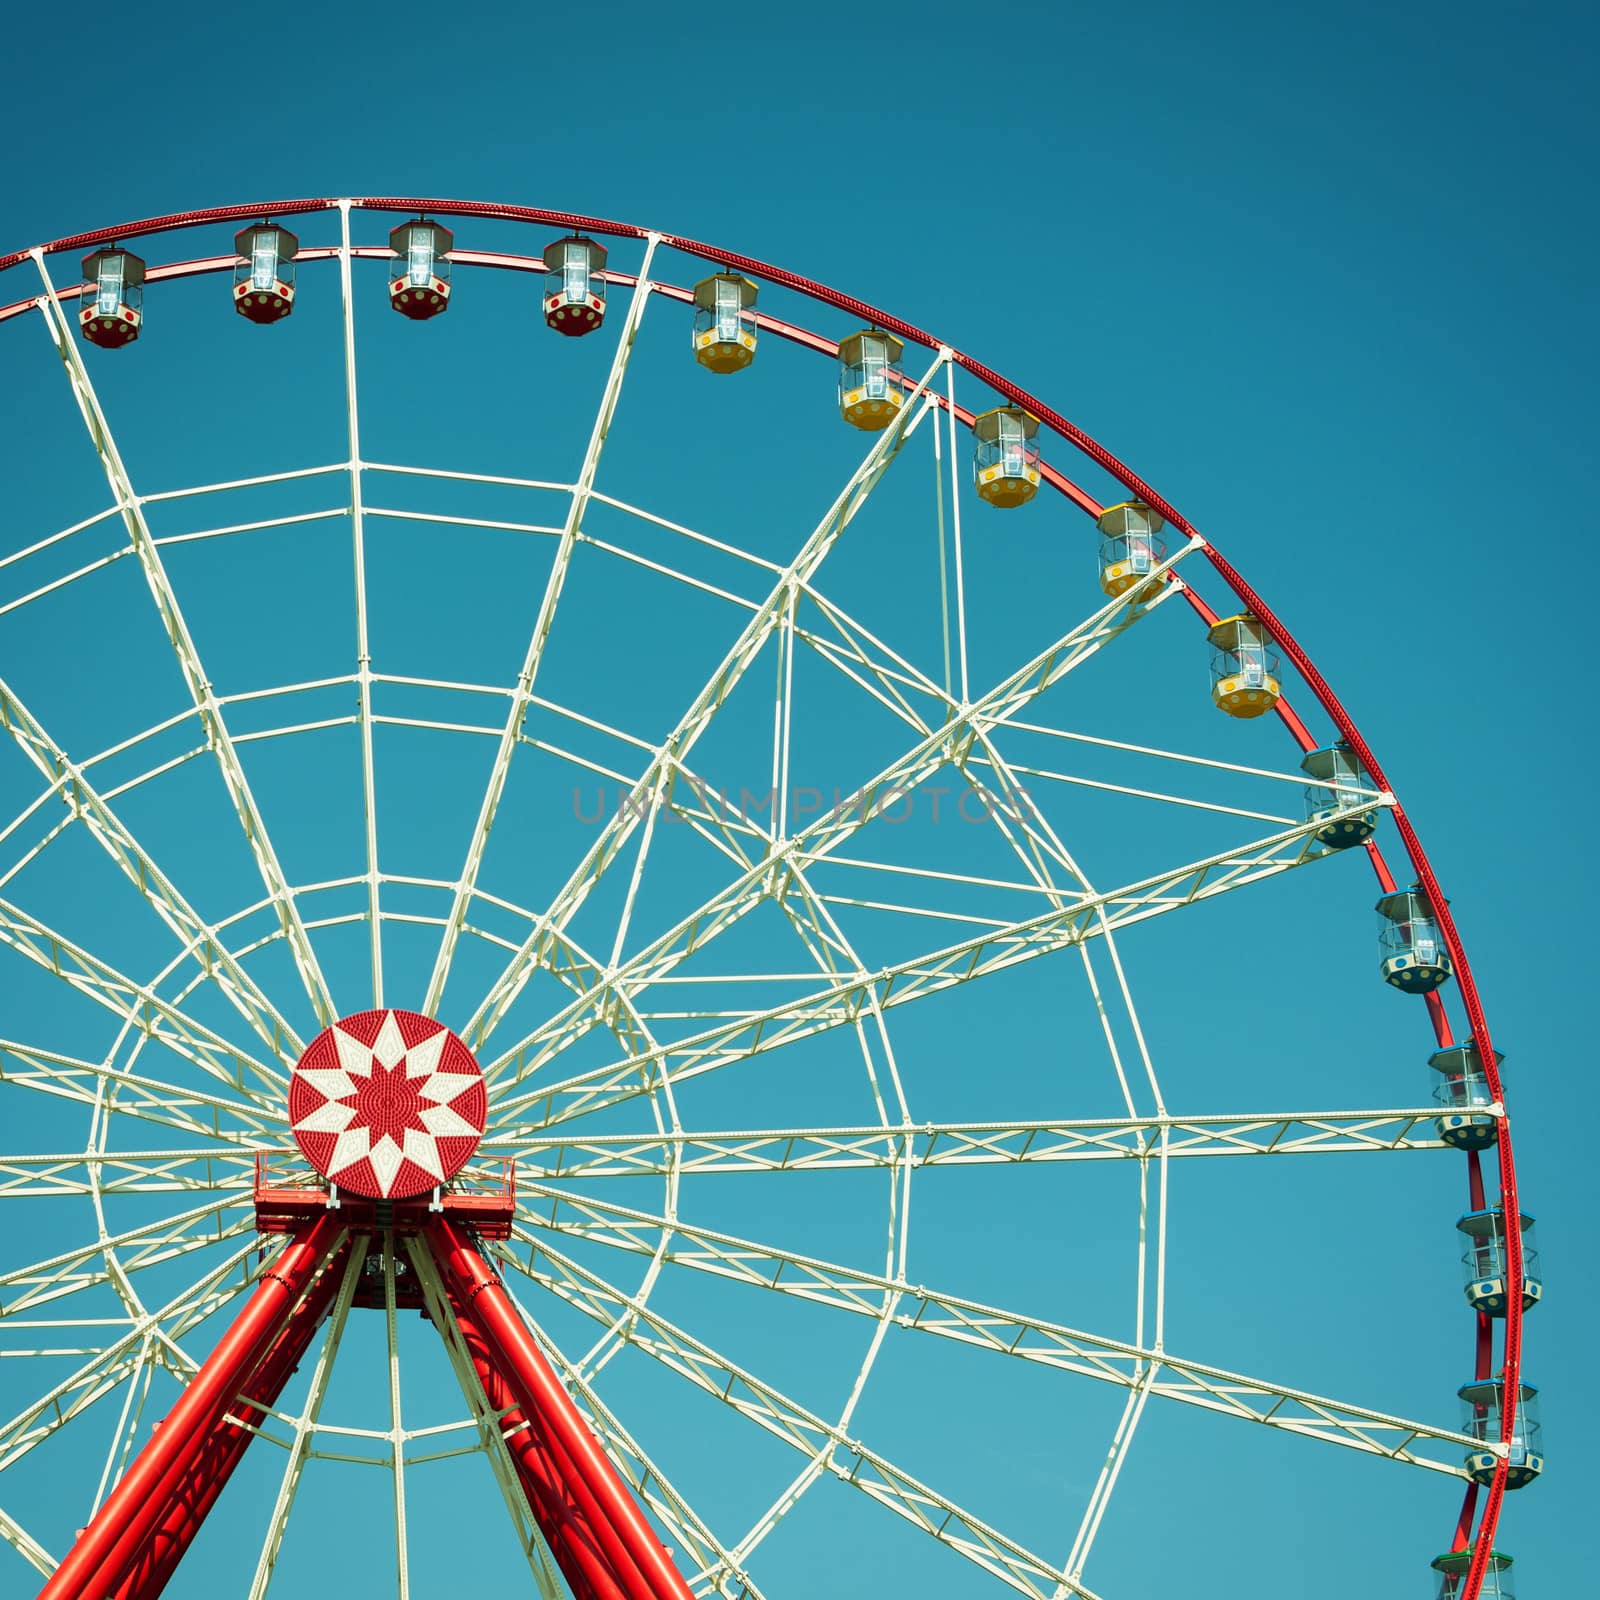 Ferris wheel attraction on blue sky background. by BPhoto